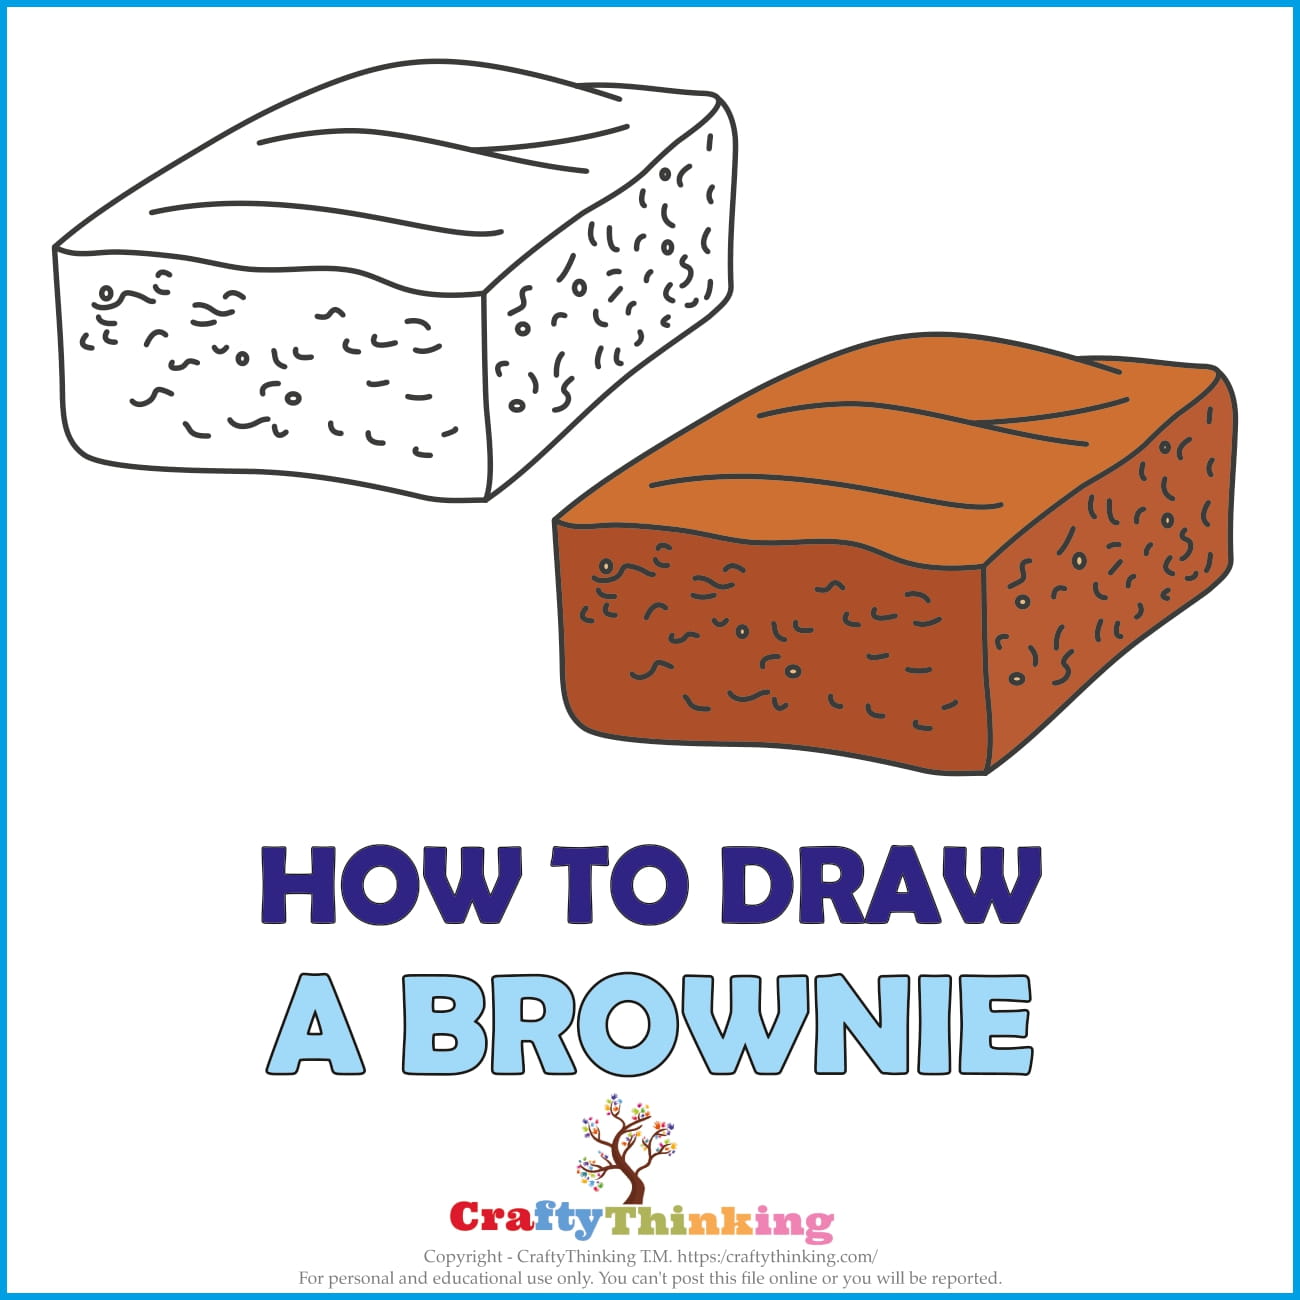 How to Draw a Brownie